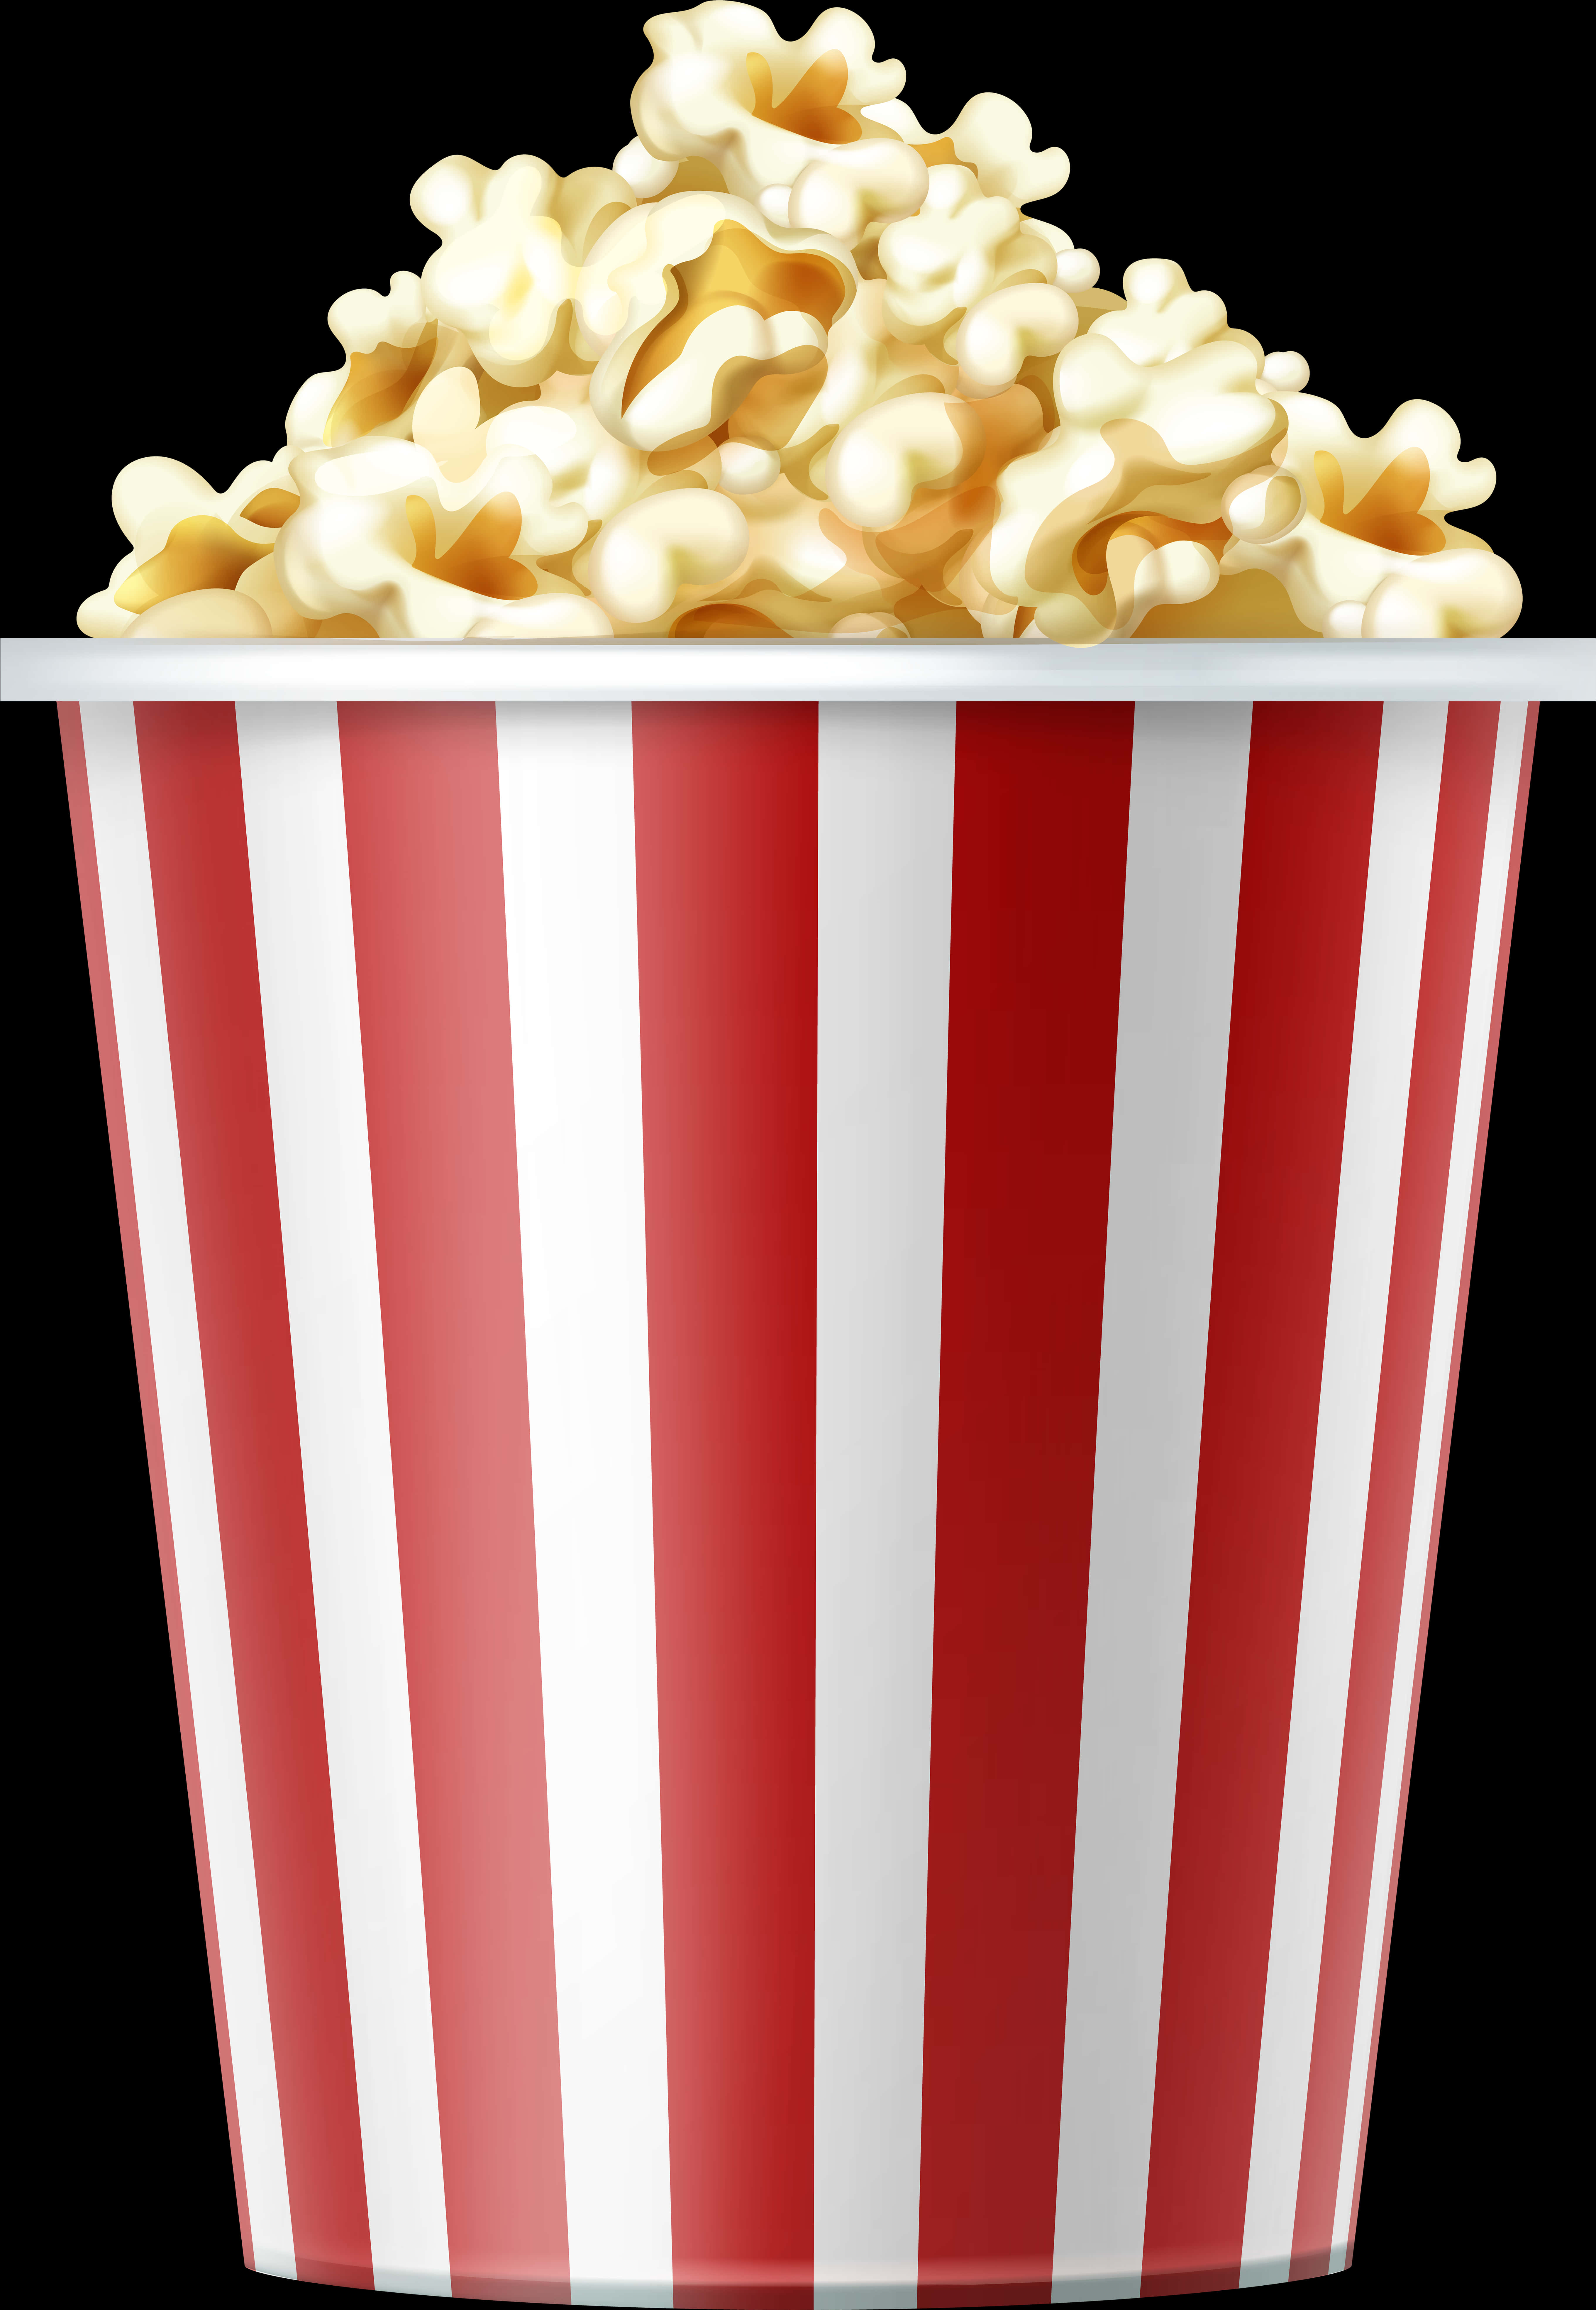 A Red And White Striped Bucket Of Popcorn